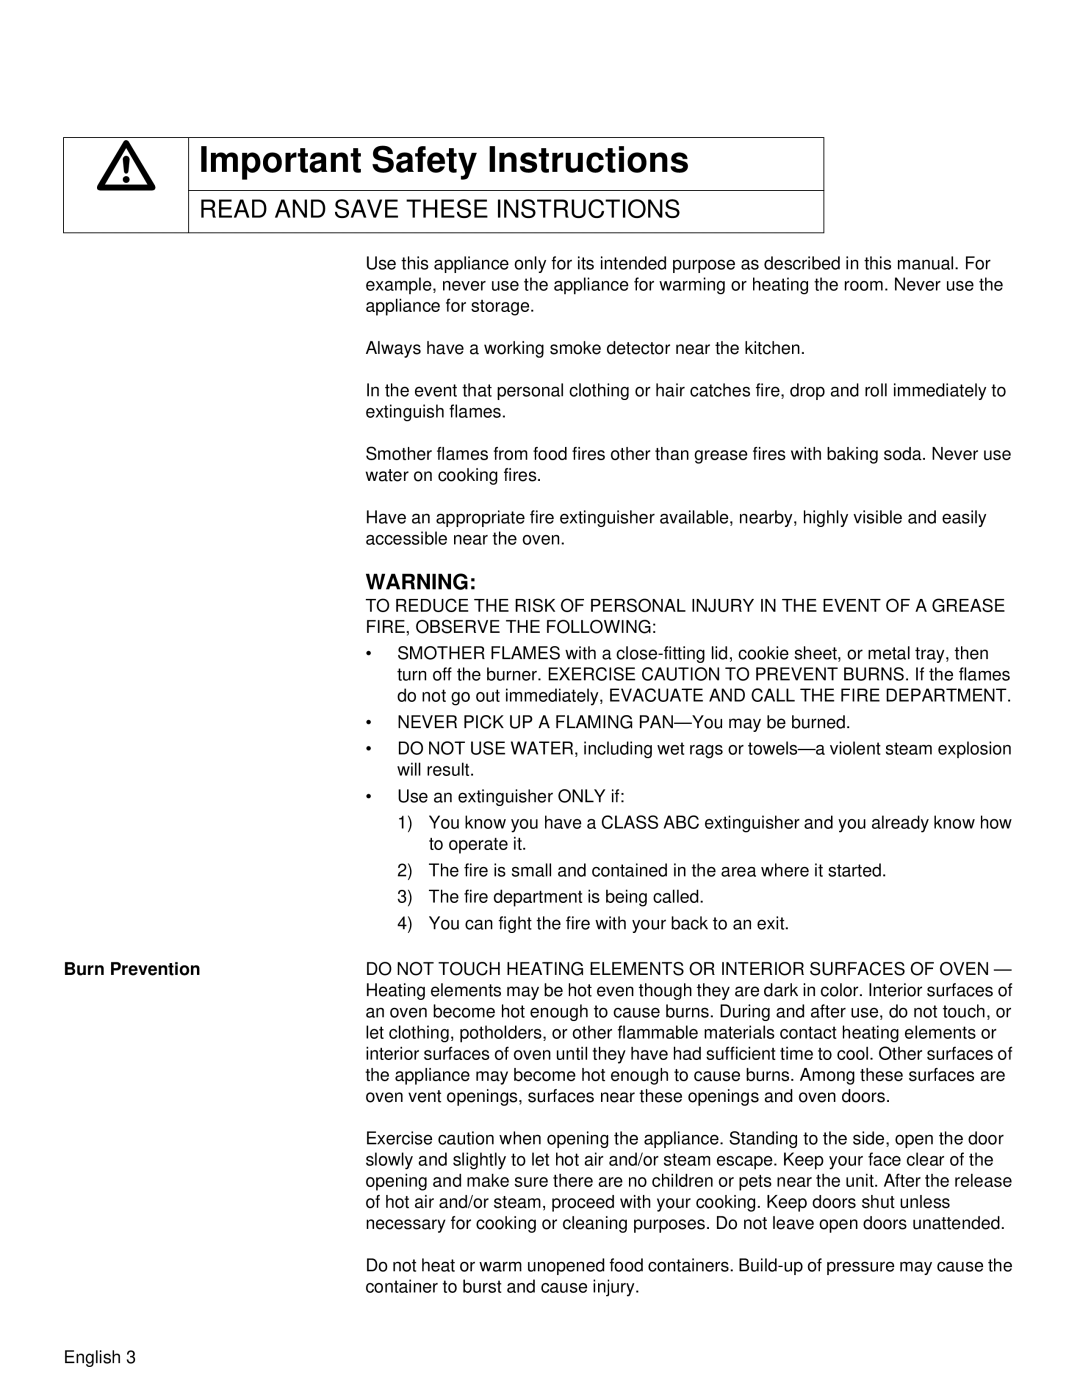 Siemens HB30D51UC, HB30S51UC manual Important Safety Instructions, Read And Save These Instructions, Burn Prevention 